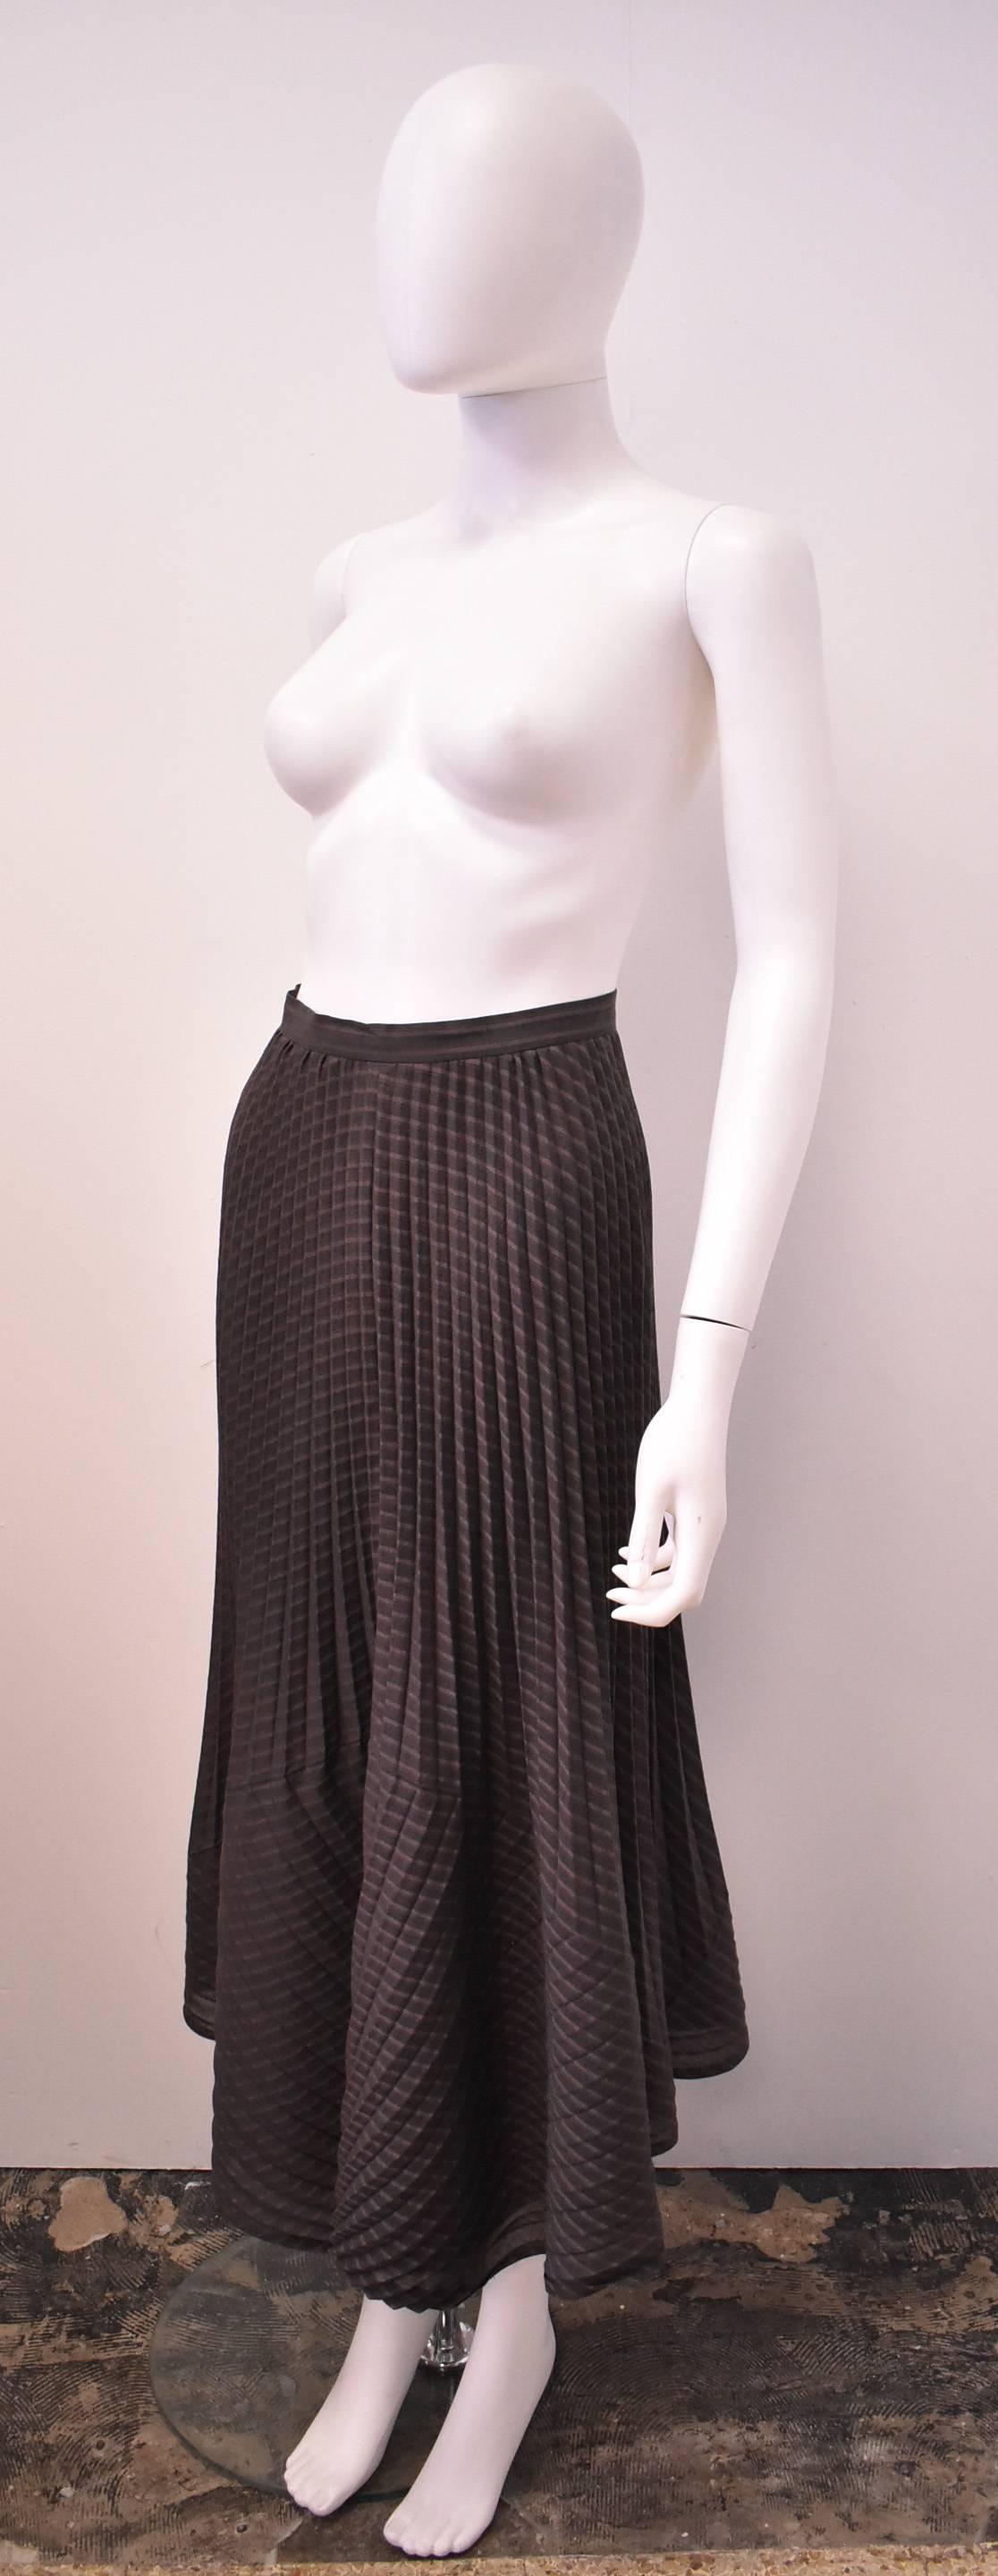 A brown striped long skirt from Issey Miyake’s White Label line. The skirt uses Miyake’s unique heat-pleating technique to create a multi-directionally pleated skirt. The top part of the skirt has vertical pleats with changes in direction at the